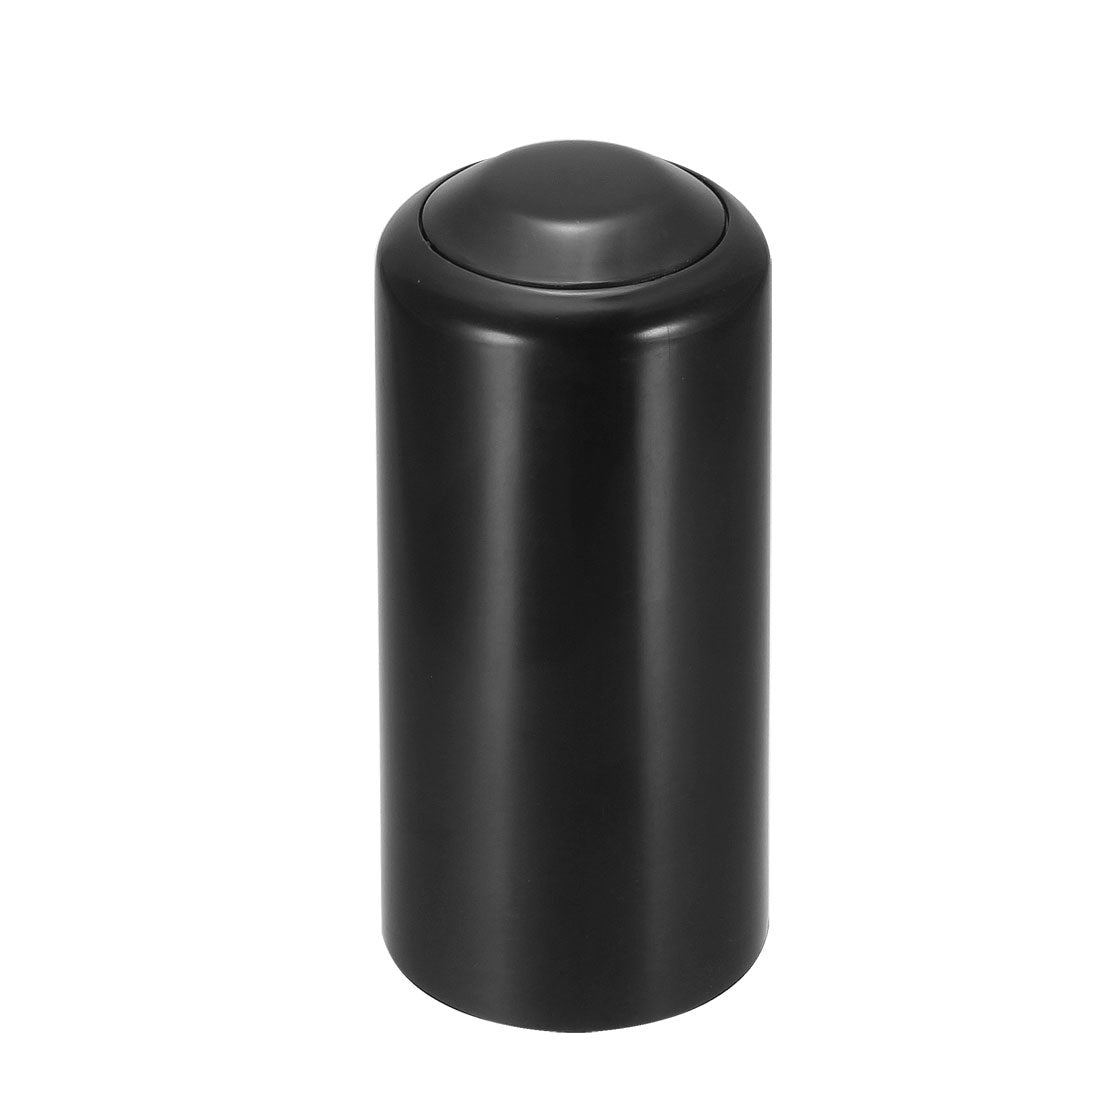 uxcell Uxcell Battery Cover Mic Battery Screw on Cap Cup Cover for PGX24 SLX24 PG58 SM58 BETA58 Wireless Black